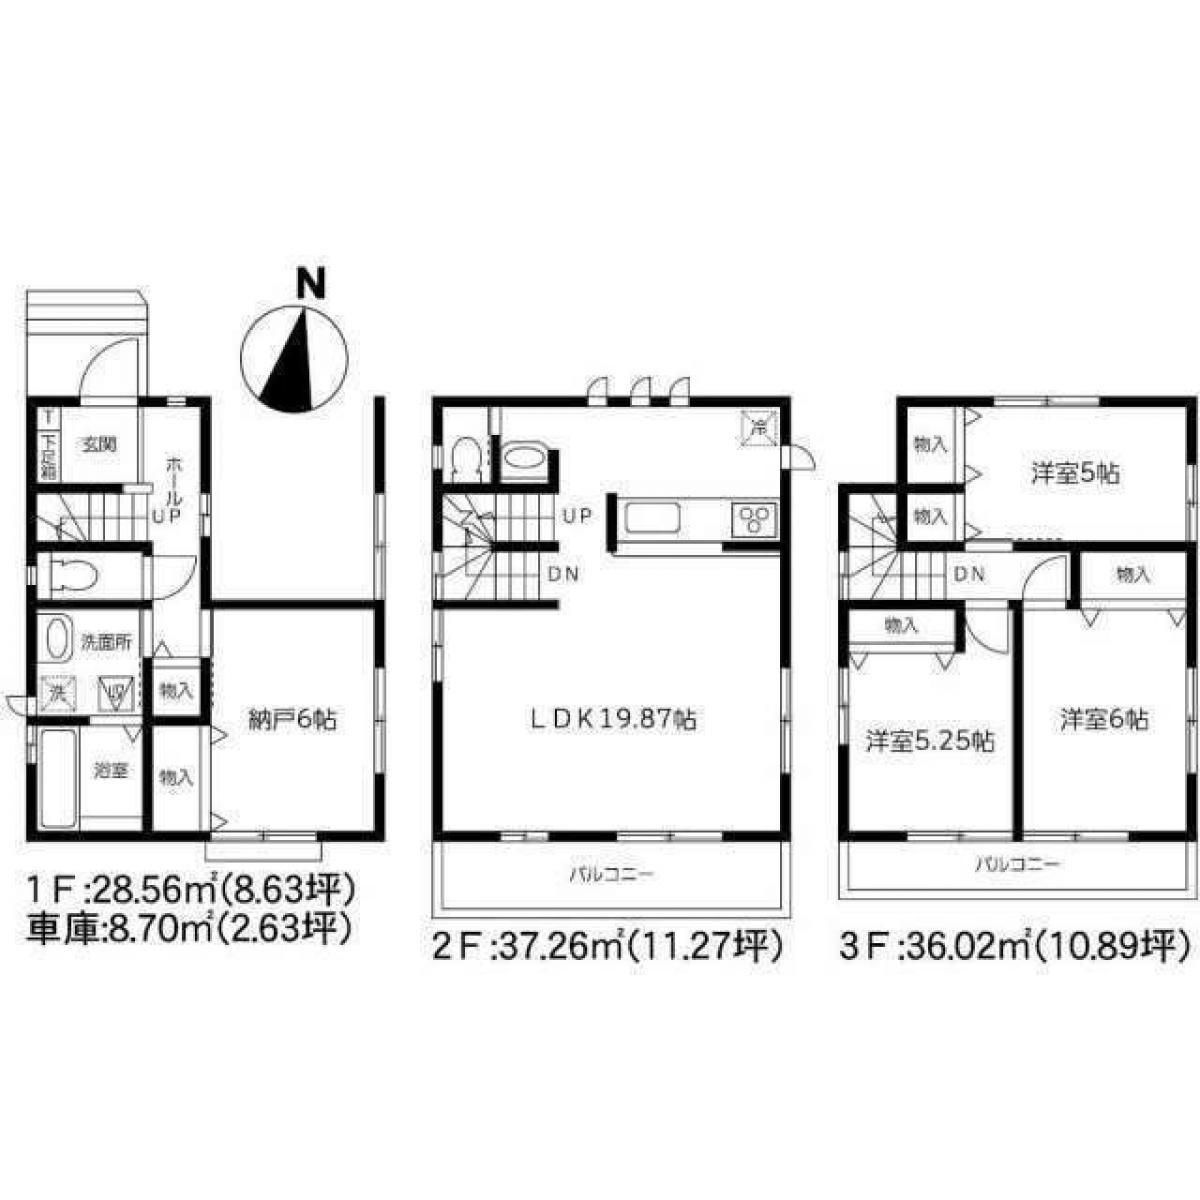 Picture of Home For Sale in Edogawa Ku, Tokyo, Japan